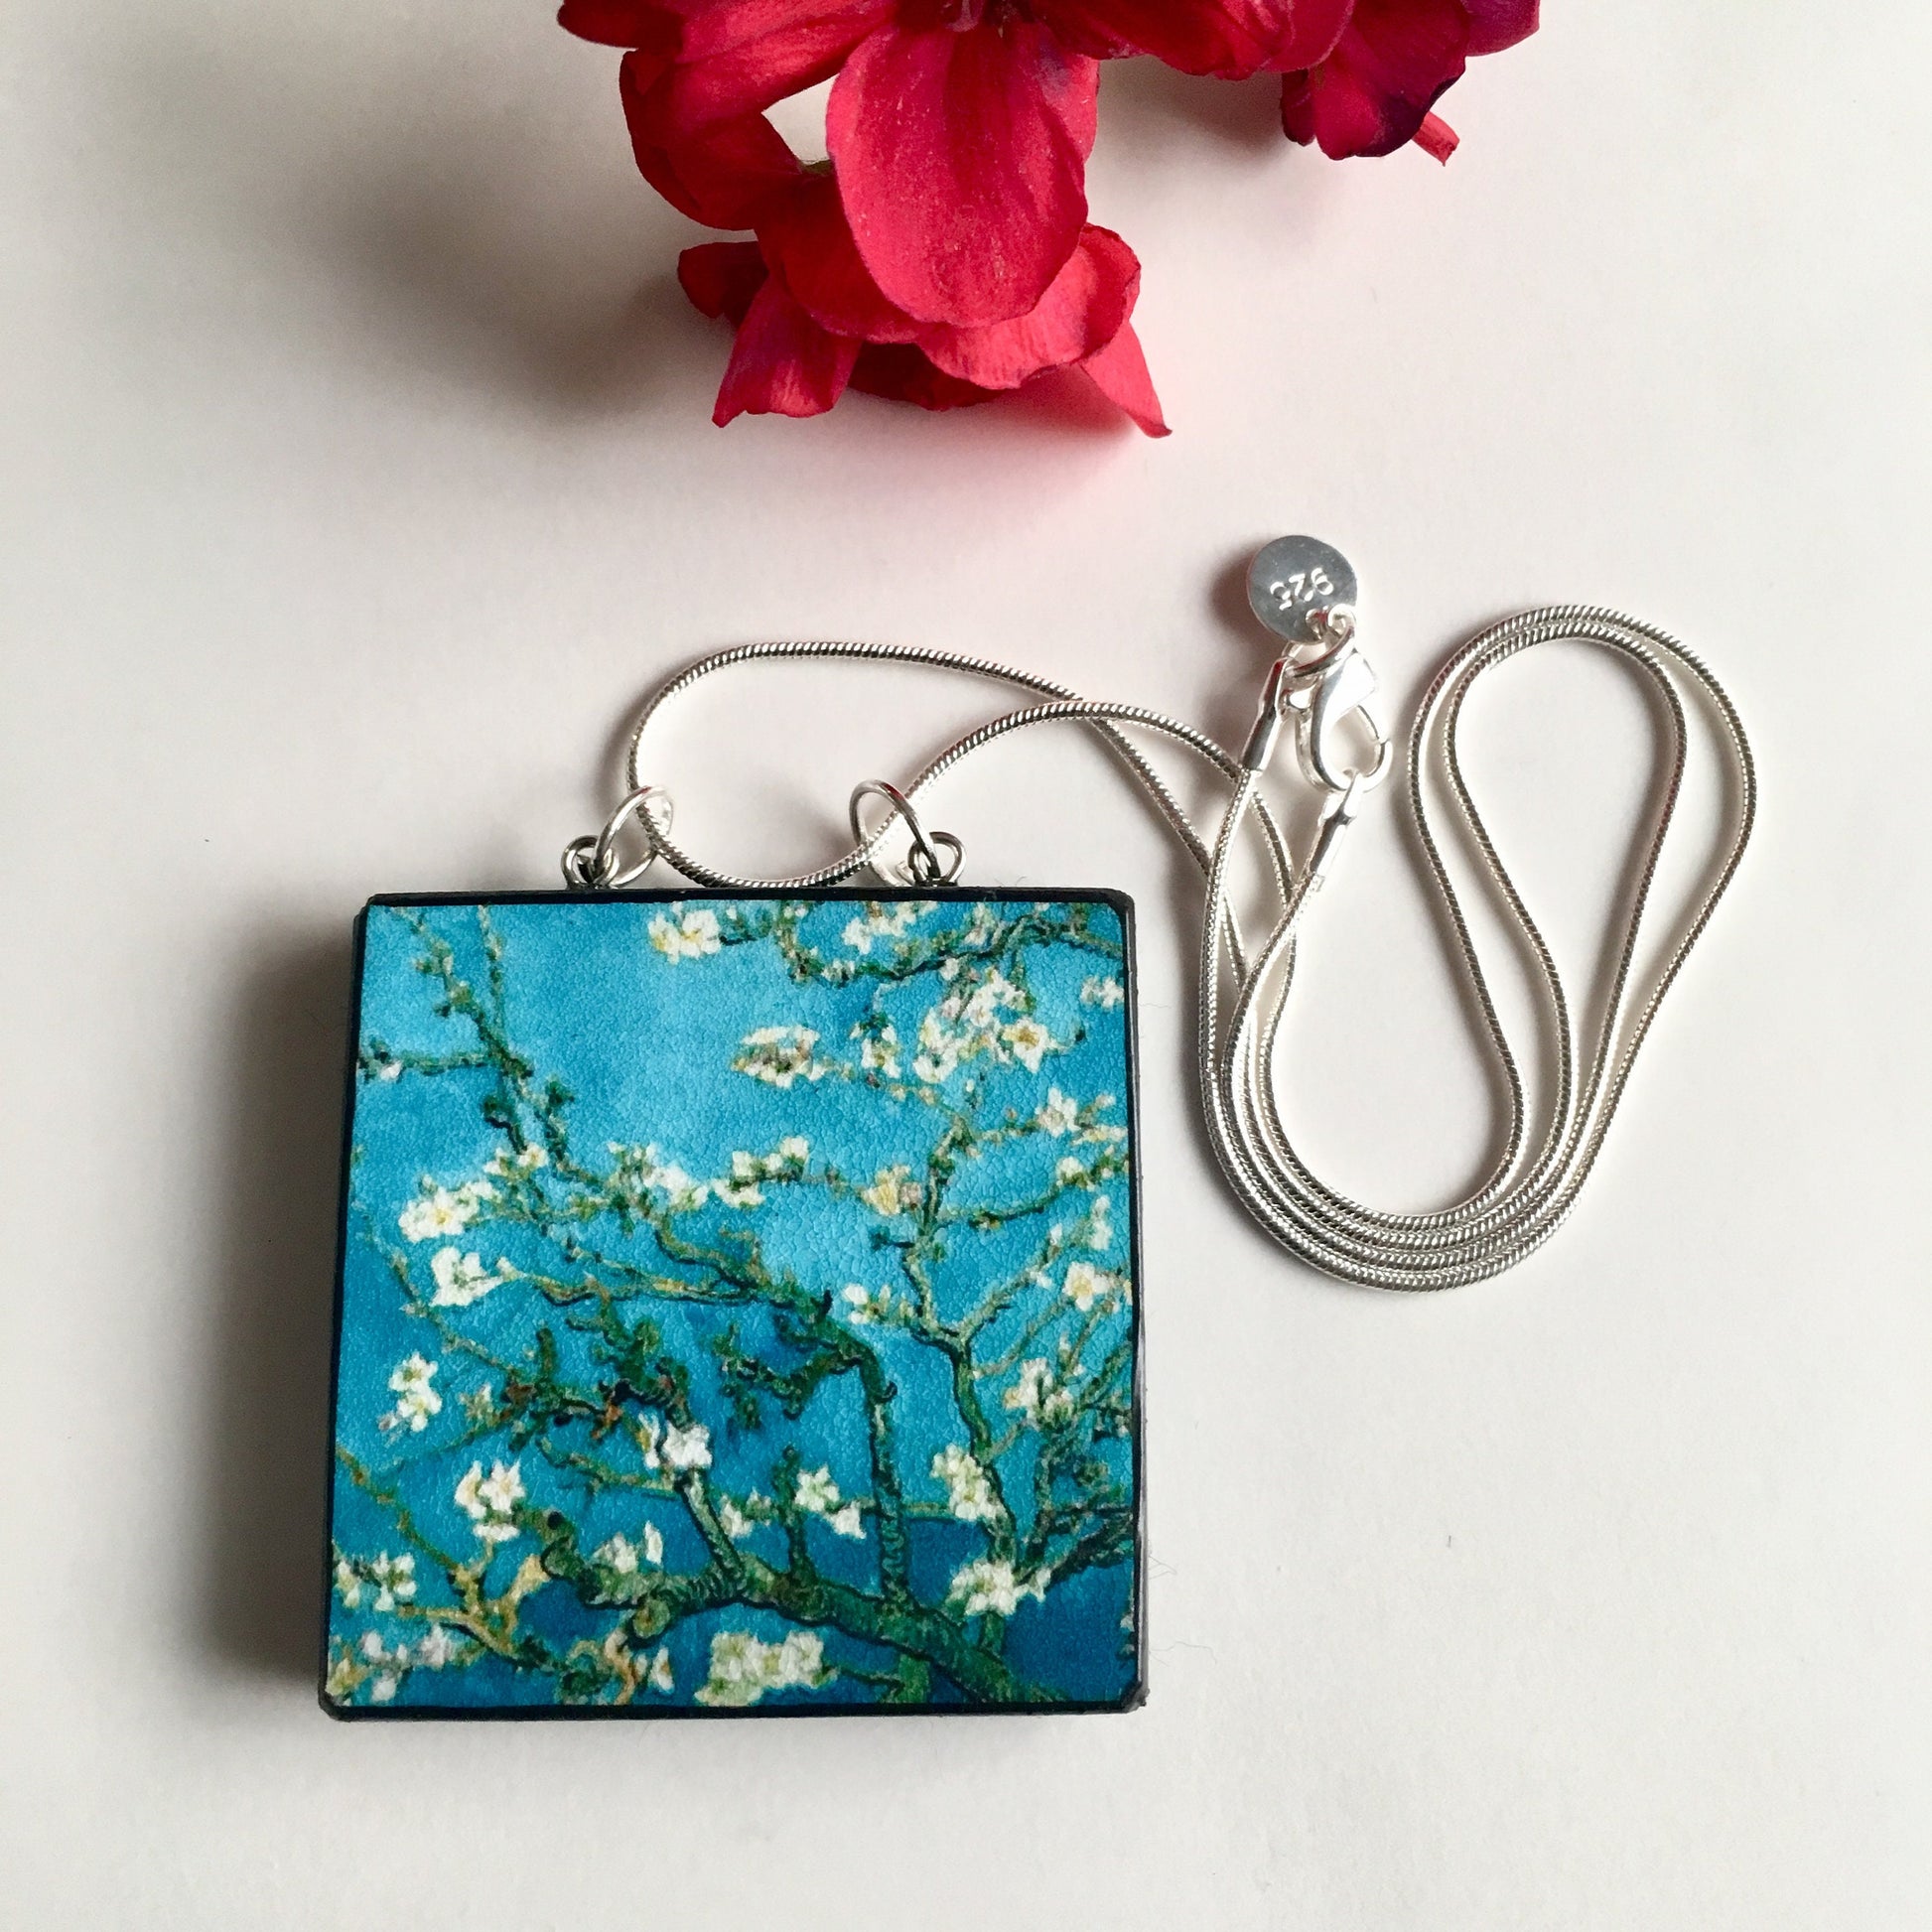  The Van Gogh necklaces is inspired by the masterpiece "Almond Blossom" where the artist painted one of his favourite subjects  large flowering branches against a blue sky. The almond tree blooms is a symbol of new life, this painting was a gift for his brother Theo and his wife who had a son.  Vincent Van Gogh was inspired by Japanese prints.   Vincent van Gogh (1853 - 1890), Saint-Rémy-de-Provence, February 1890 oil on canvas, 73.3 cm x 92.4 cm